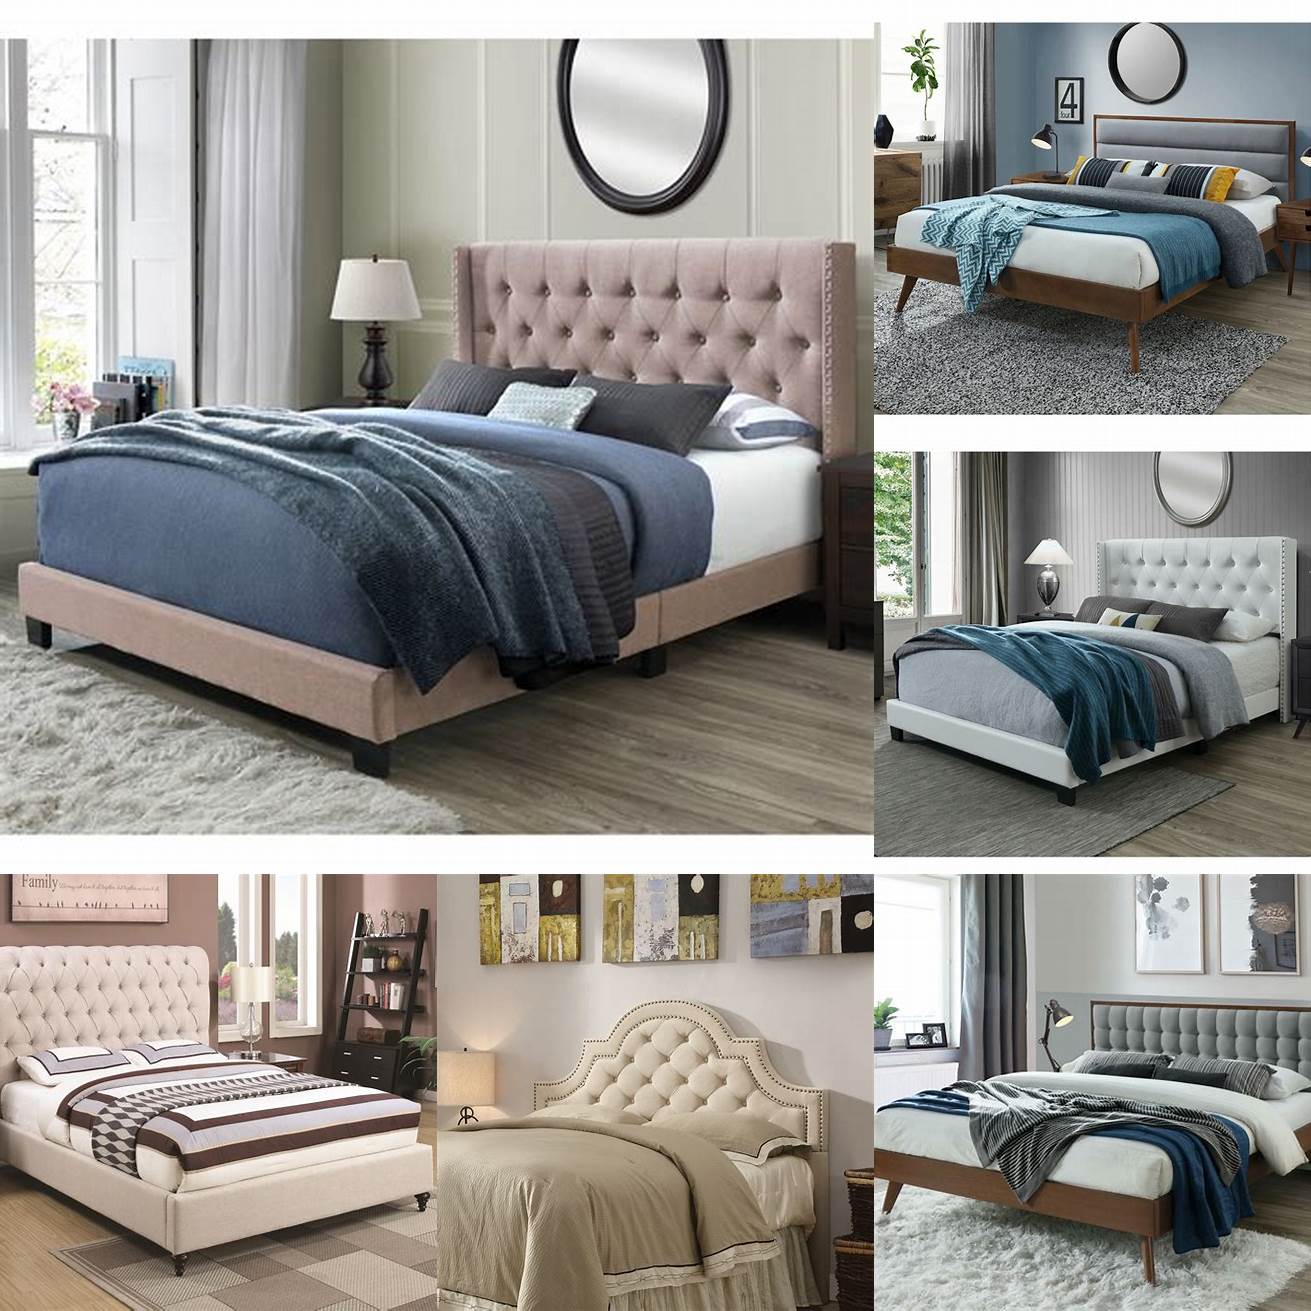 Comfortable and stylish upholstered bed